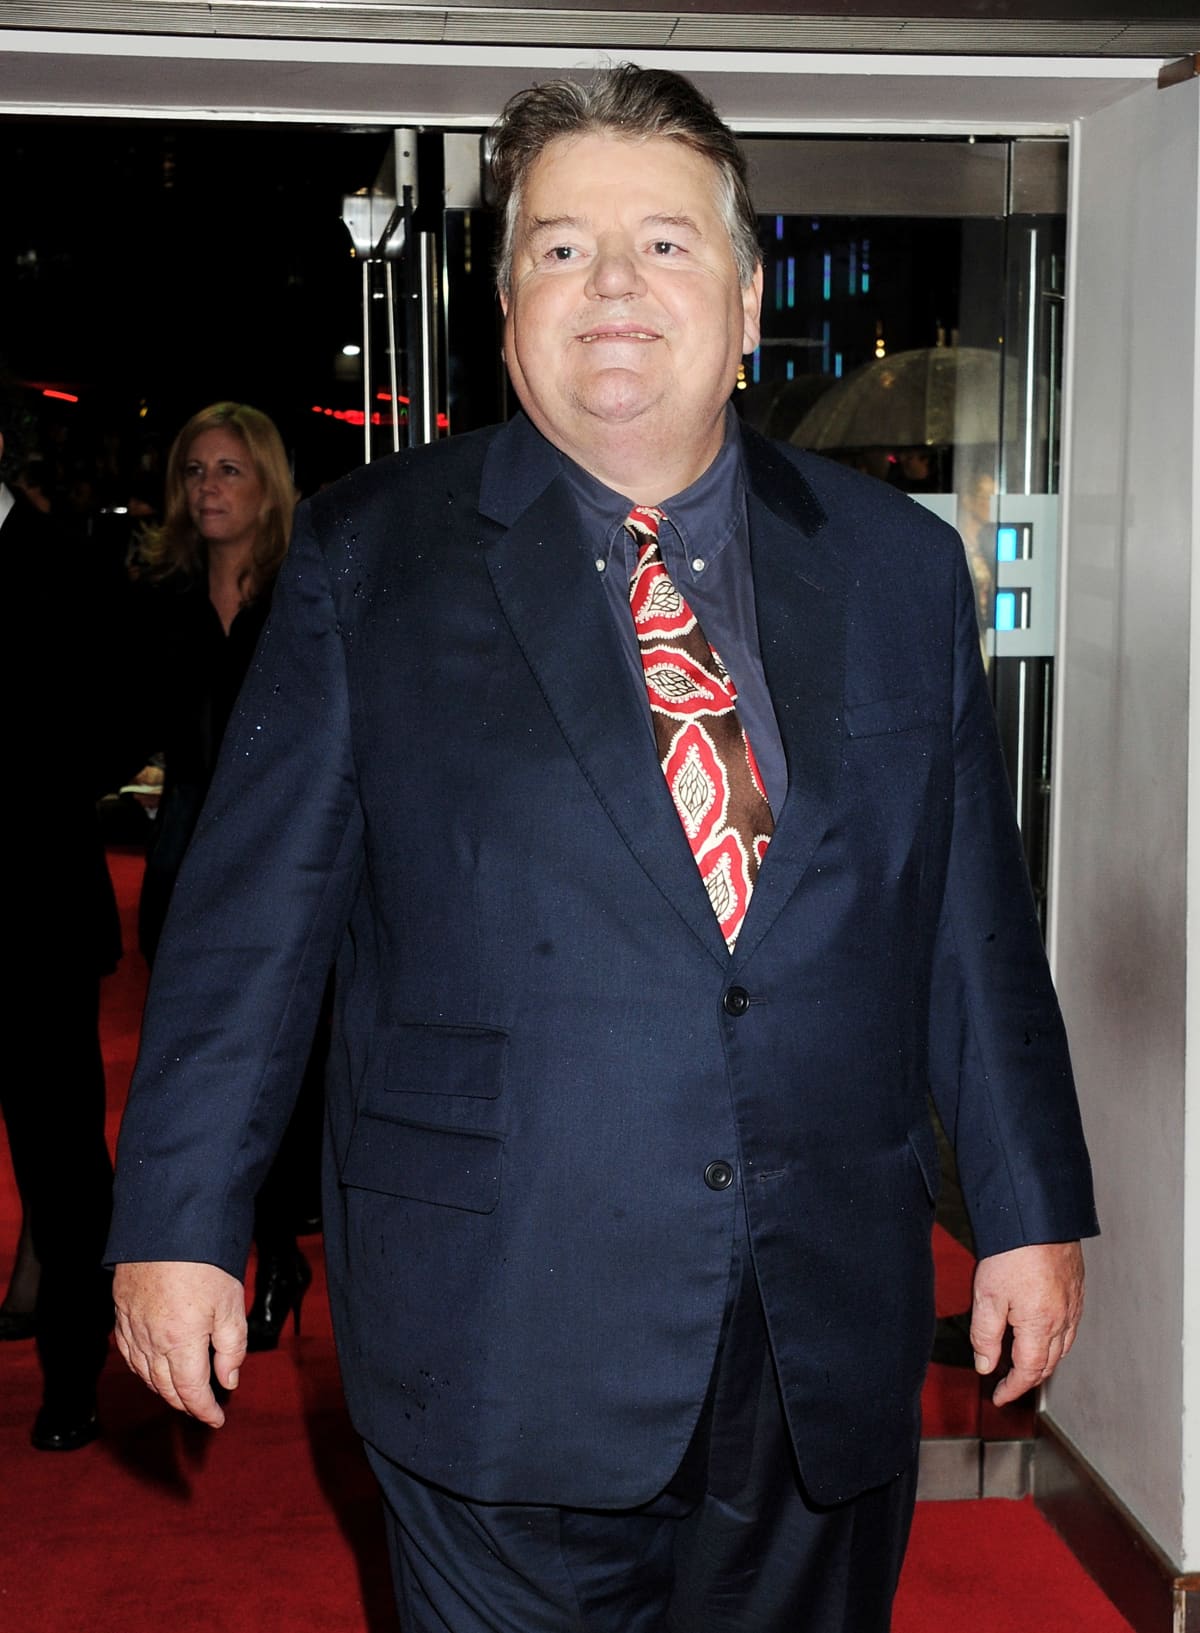 Robbie Coltrane Arrives For The World Premiere Of 'Quantum Of Solace' At The Odeon Leicester Square In London. (Photo by Antony Jones/UK Press via Getty Images)